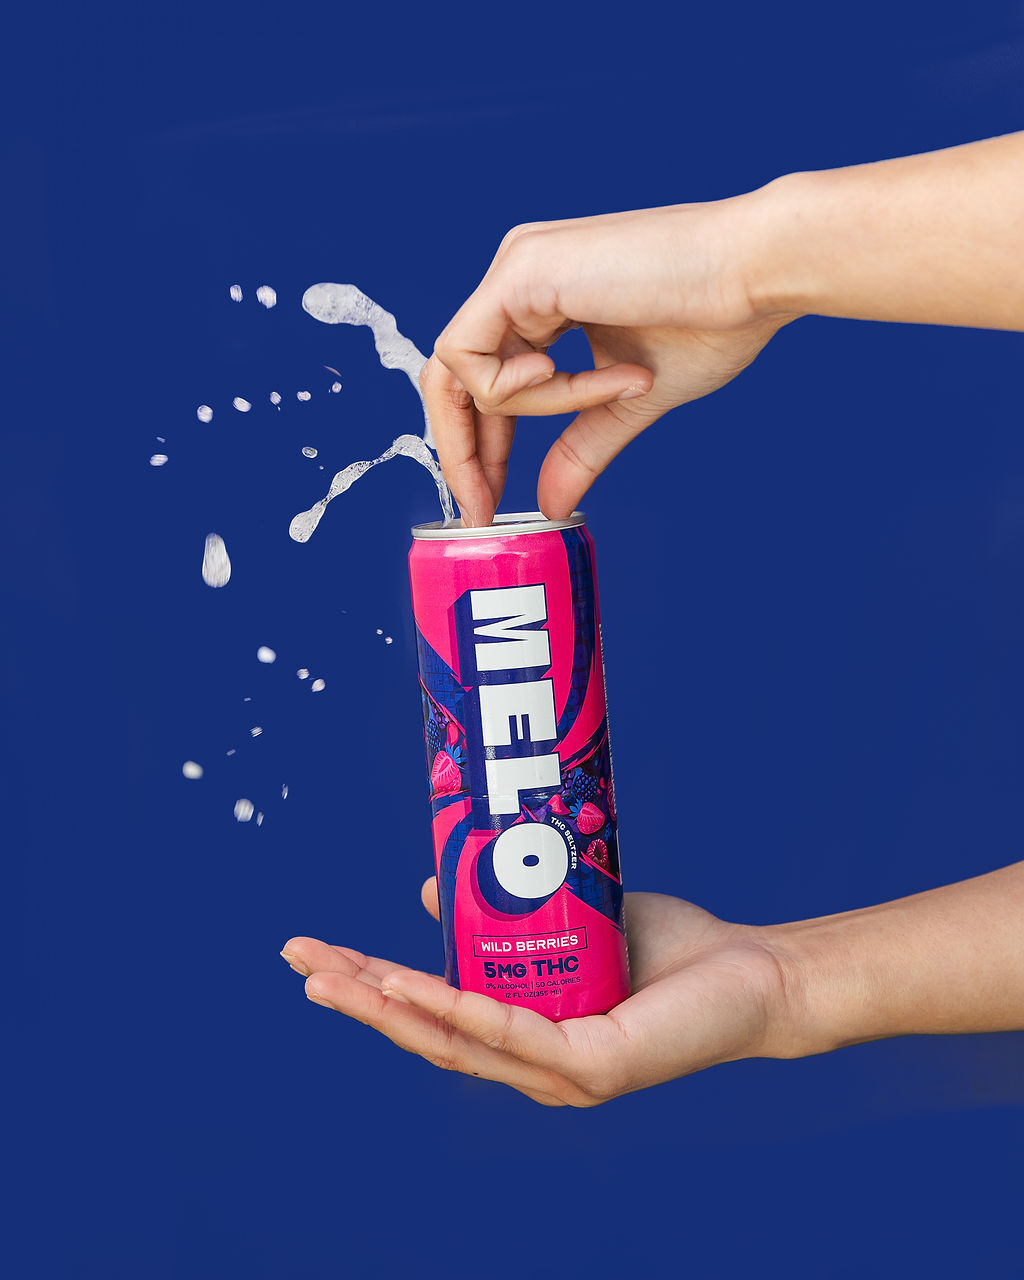 Melo THC Beverages: A Refreshing Review of Grapefruit and Wild Berries